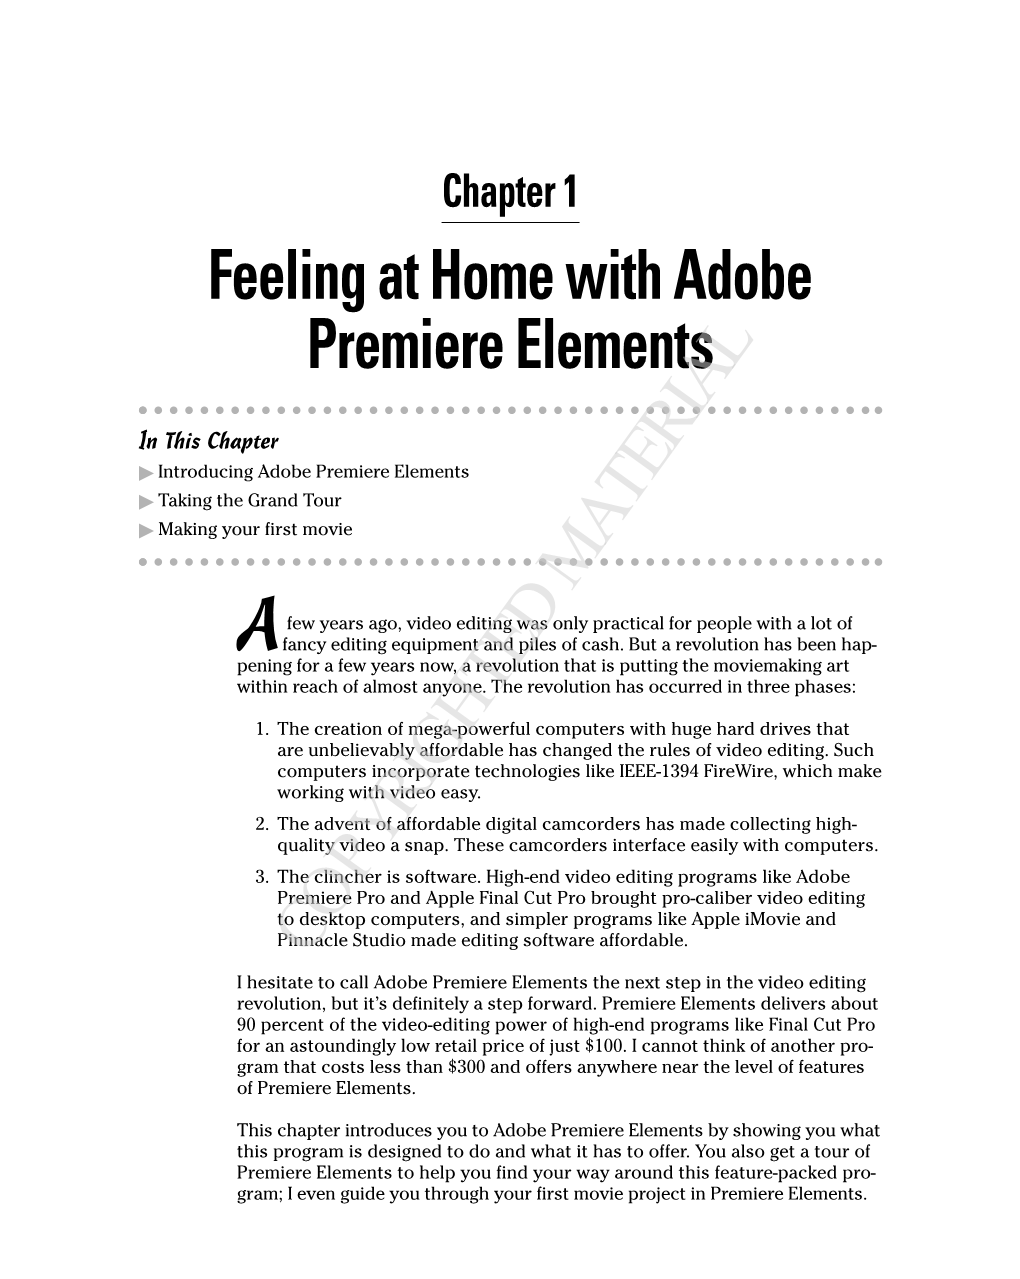 Feeling at Home with Adobe Premiere Elements